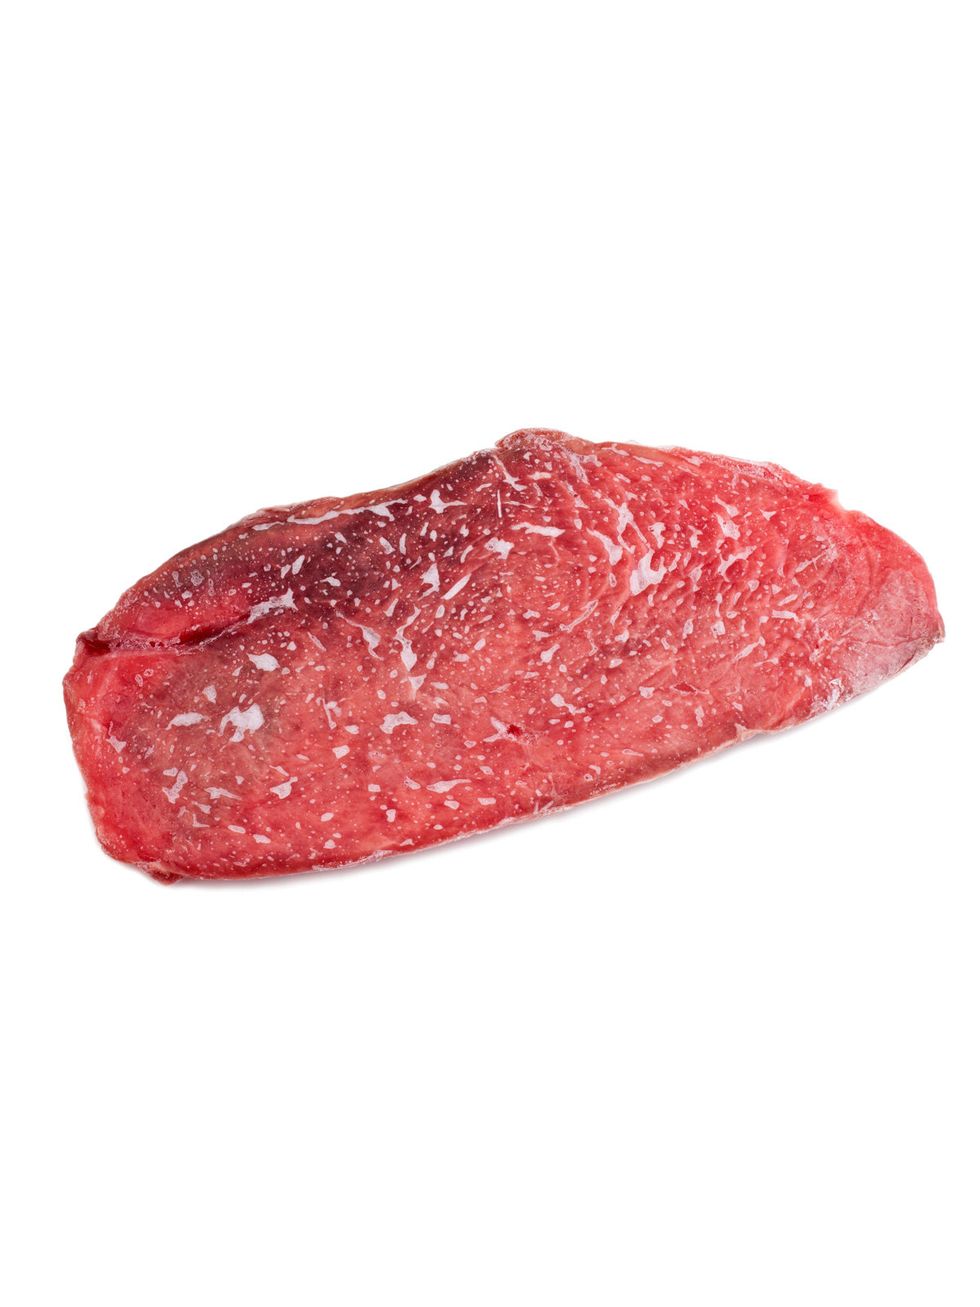 Red, Carmine, Maroon, Natural material, Coquelicot, Animal product, Flesh, Dessert, 